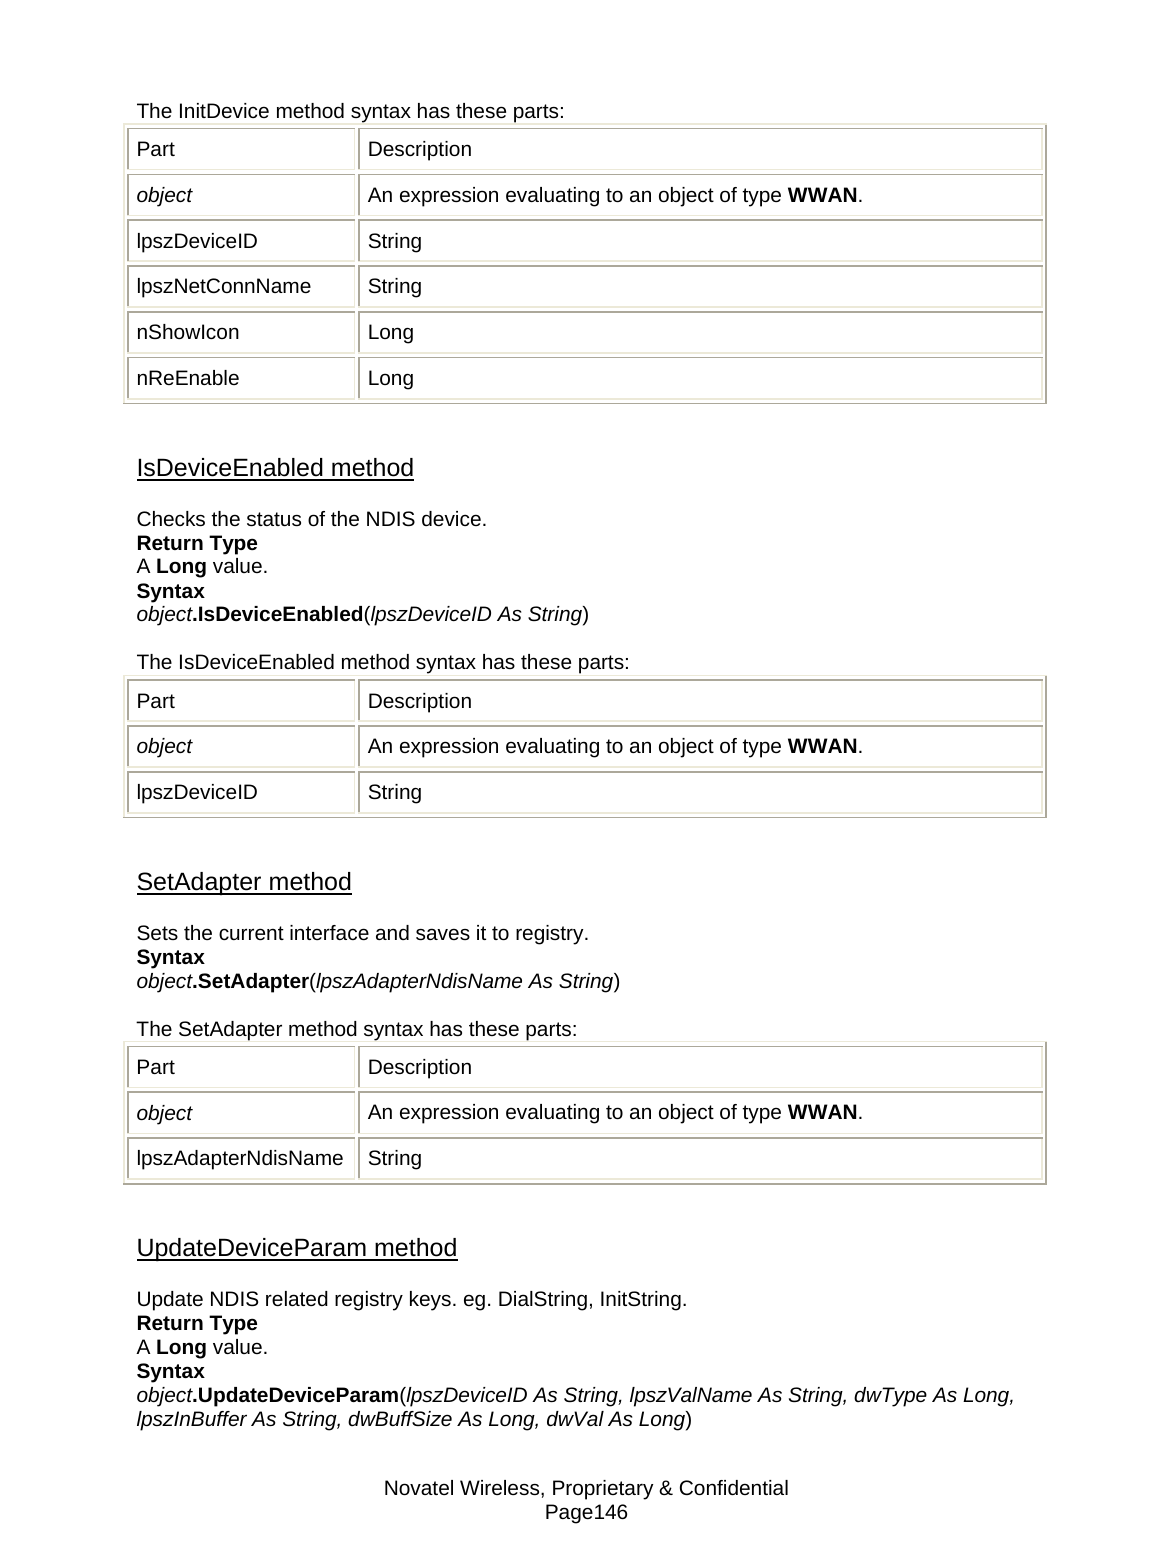 Novatel Wireless, Proprietary &amp; Confidential Page146 The InitDevice method syntax has these parts: Part Description object An expression evaluating to an object of type WWAN. lpszDeviceID String lpszNetConnName String nShowIcon Long nReEnable Long  IsDeviceEnabled method Checks the status of the NDIS device. Return Type A Long value. Syntax object.IsDeviceEnabled(lpszDeviceID As String)  The IsDeviceEnabled method syntax has these parts: Part Description object An expression evaluating to an object of type WWAN. lpszDeviceID String  SetAdapter method Sets the current interface and saves it to registry. Syntax object.SetAdapter(lpszAdapterNdisName As String)  The SetAdapter method syntax has these parts: Part Description object An expression evaluating to an object of type WWAN. lpszAdapterNdisName String  UpdateDeviceParam method Update NDIS related registry keys. eg. DialString, InitString. Return Type A Long value. Syntax object.UpdateDeviceParam(lpszDeviceID As String, lpszValName As String, dwType As Long, lpszInBuffer As String, dwBuffSize As Long, dwVal As Long) 